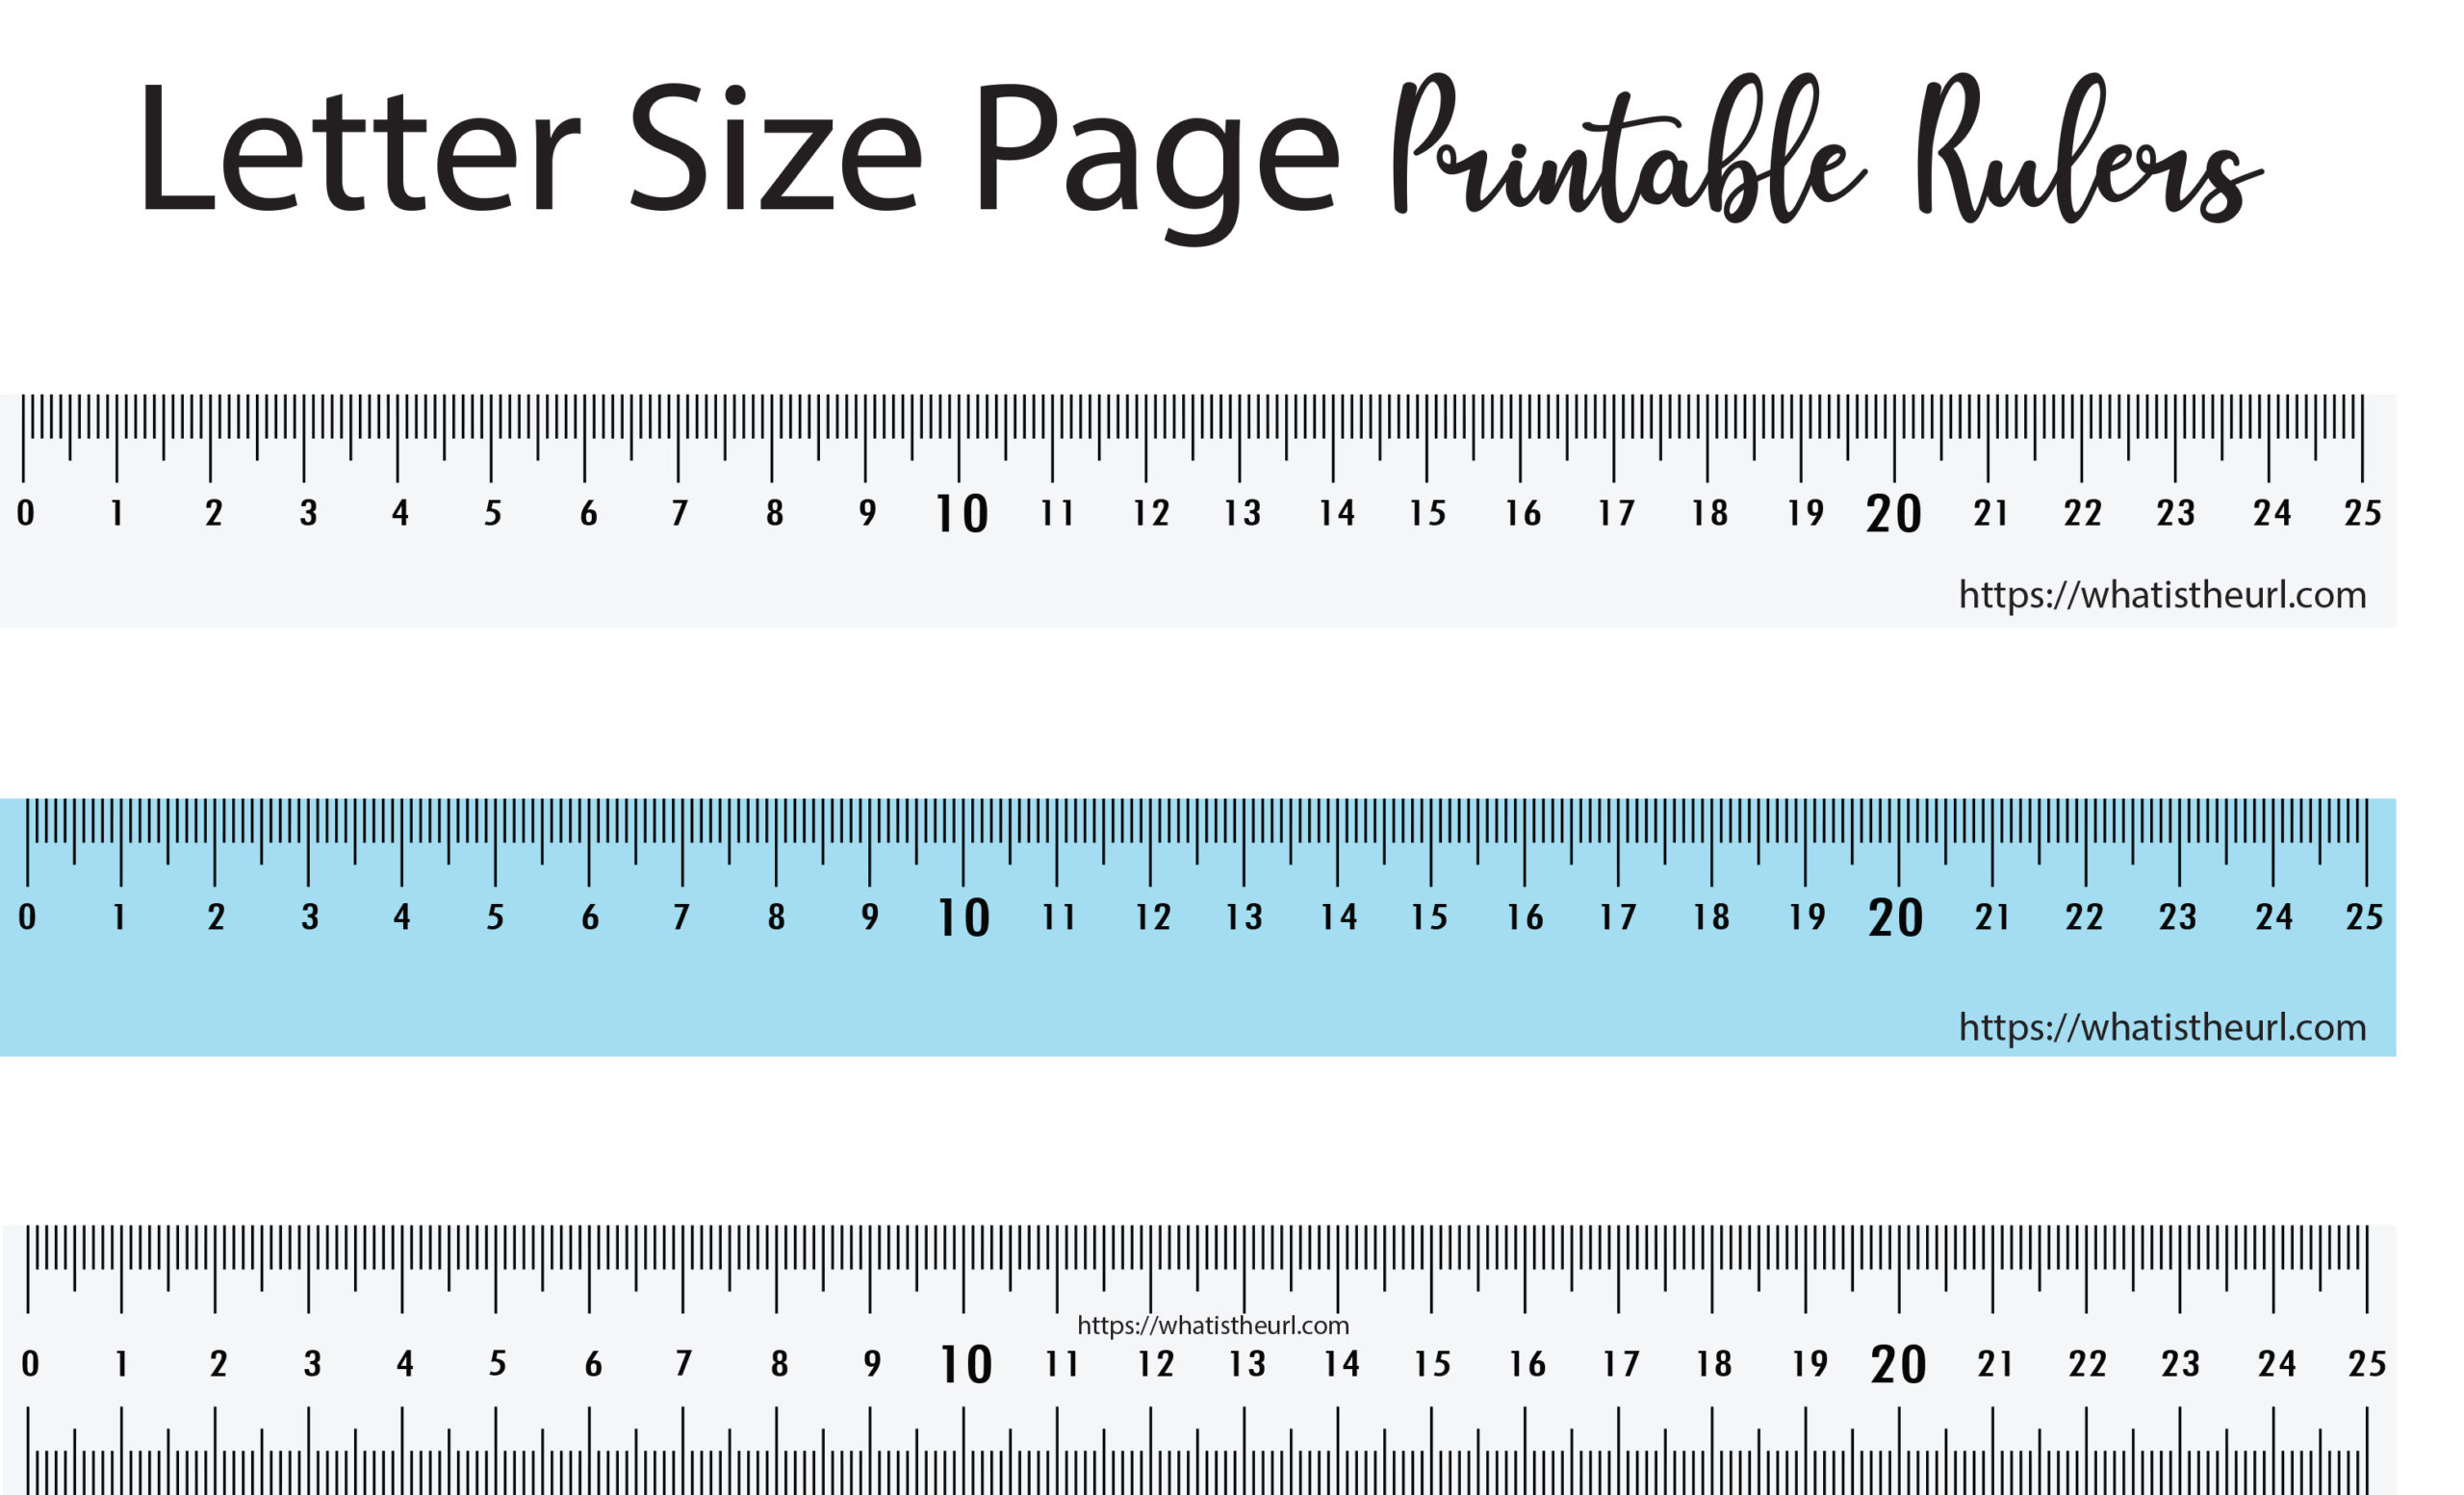 Printable Rulers for Letter and A4 Size Papers Up to 25 centimeters